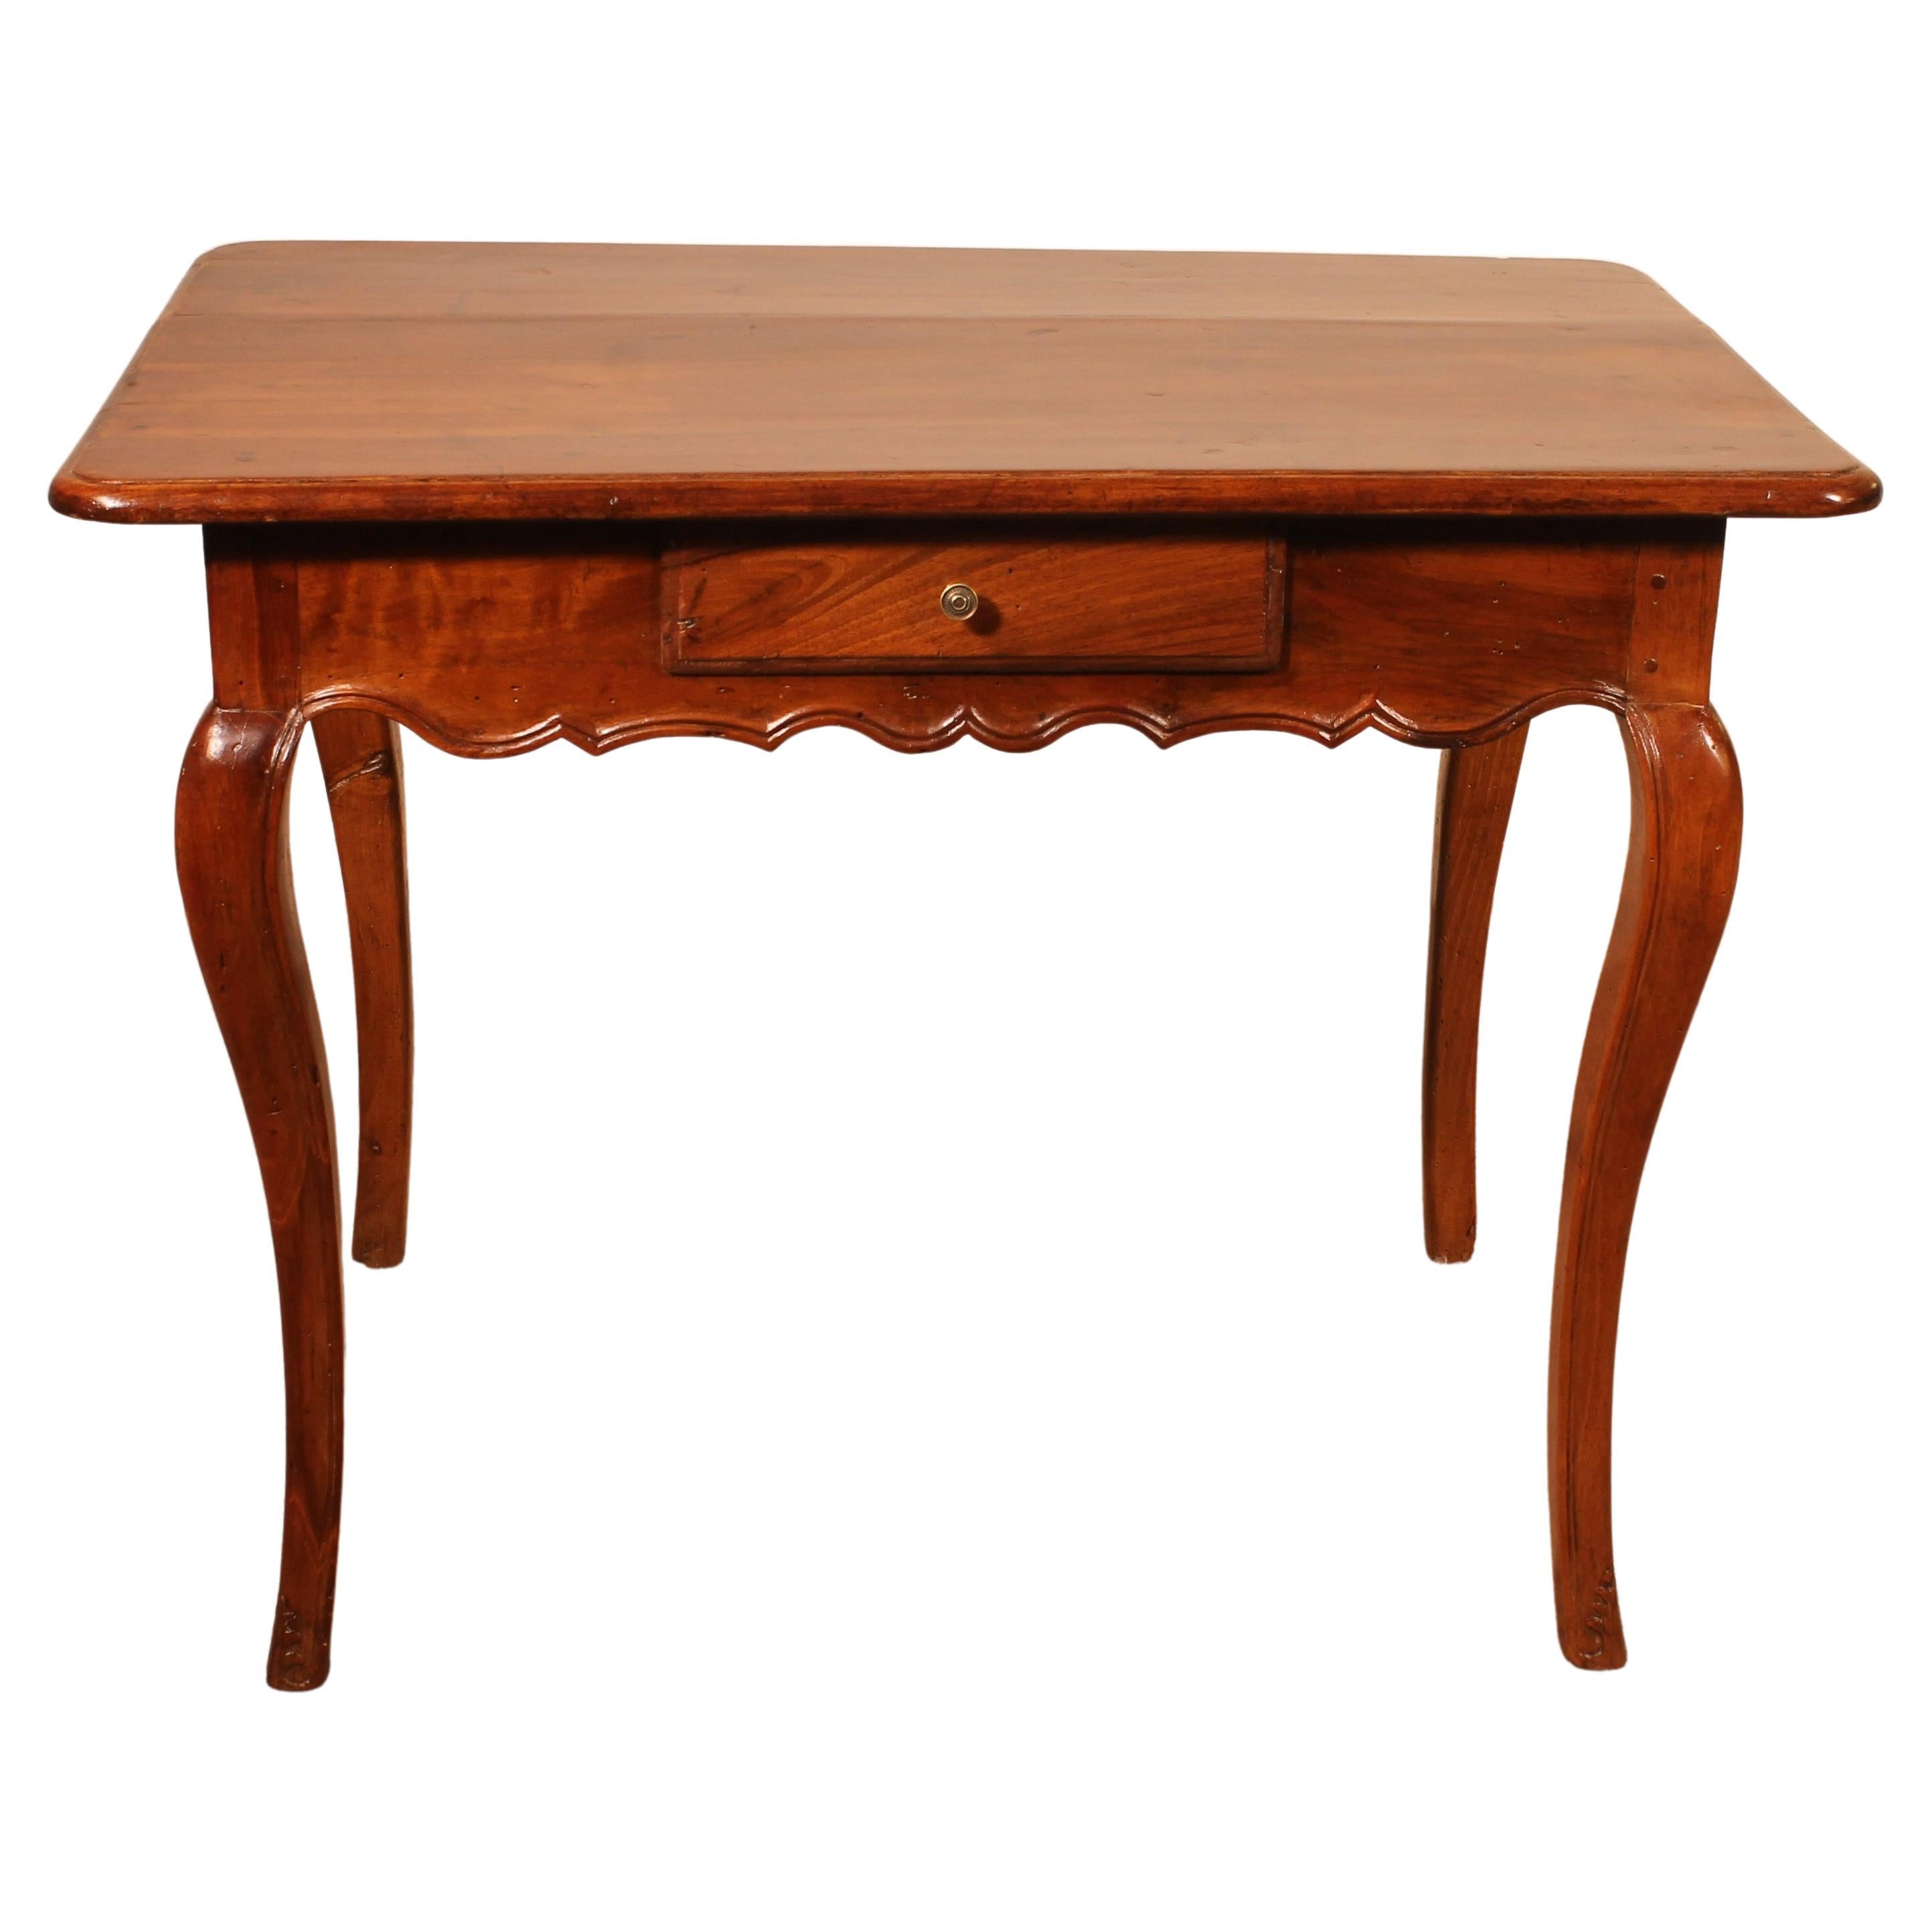 Side Table or Writing Table from the XVIII Century in Walnut